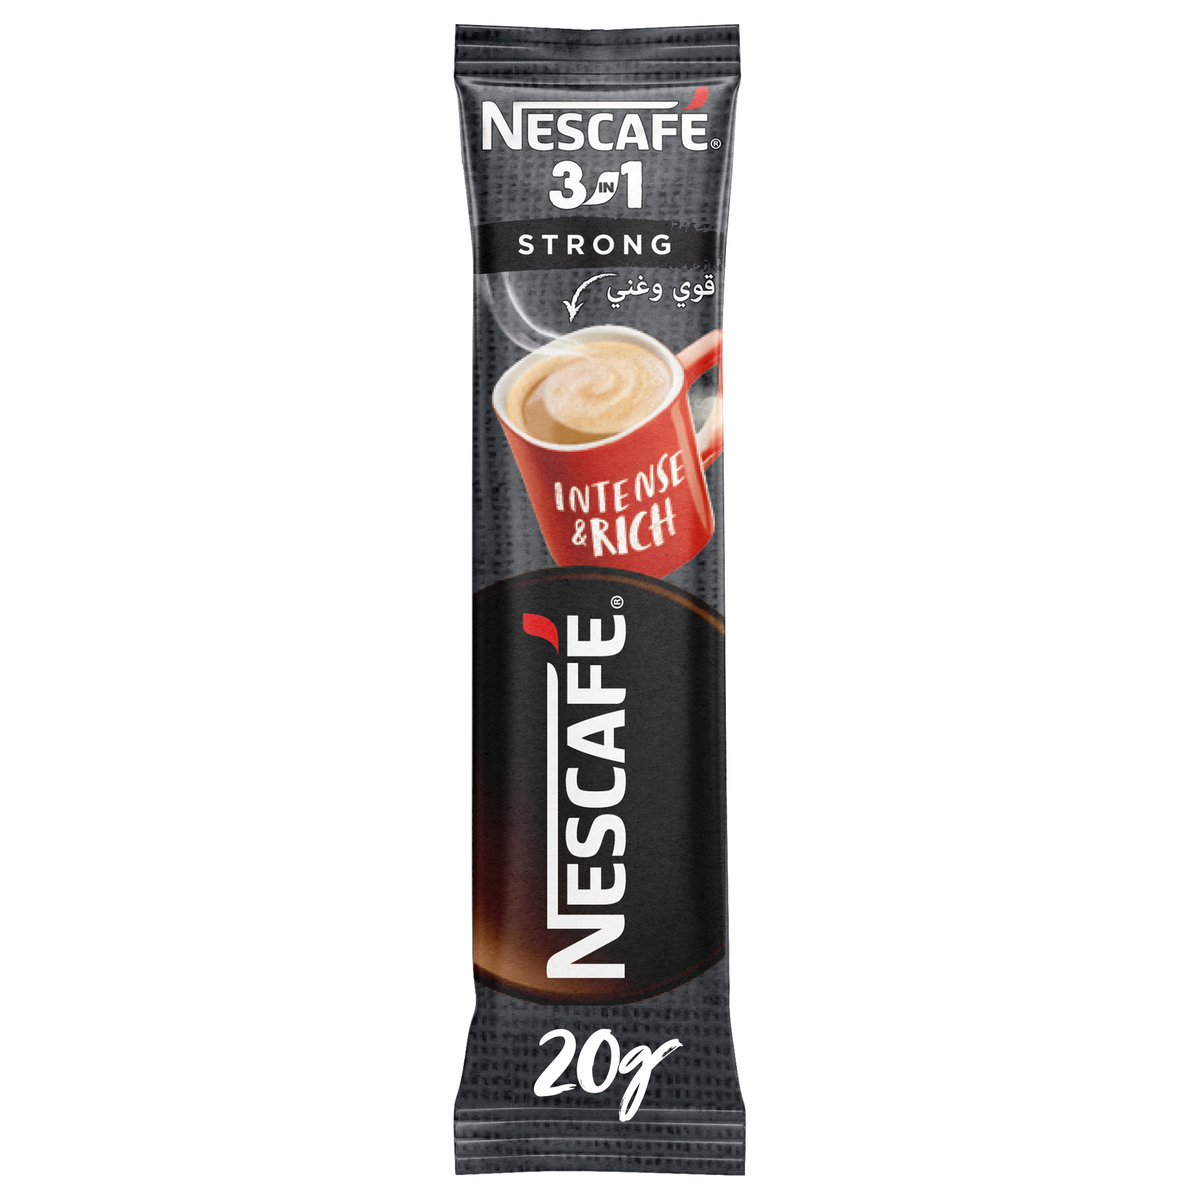 Nescafe 3 in 1 strong - 10 PACK – island MishMash